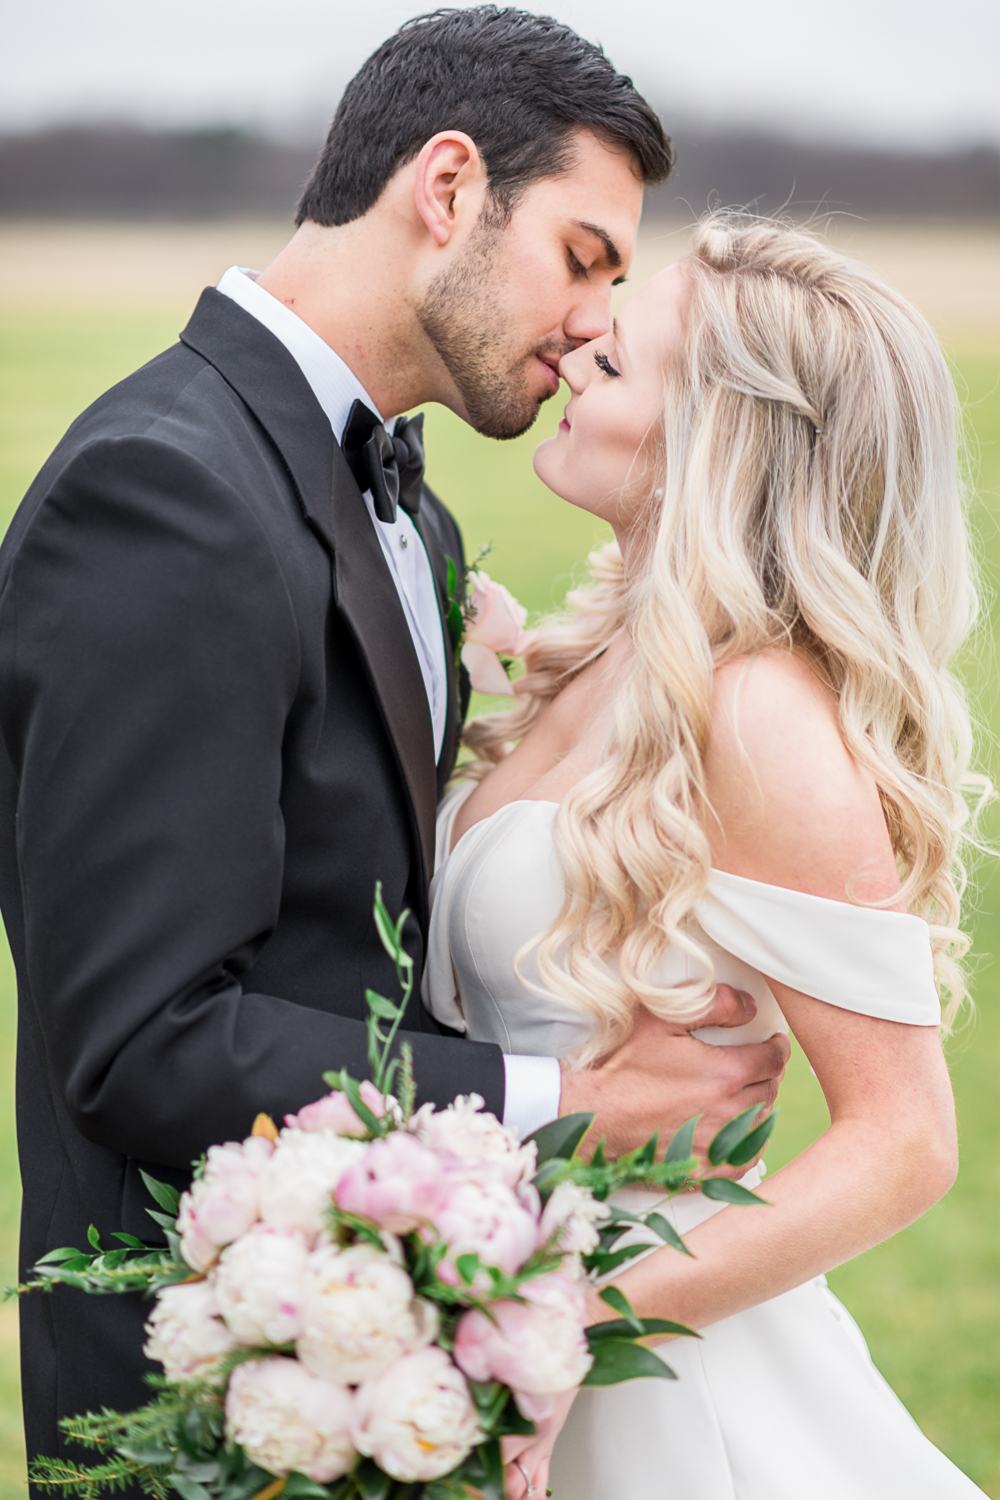 How to Hire the Right Wedding Photographer - Hunter and Sarah Photography